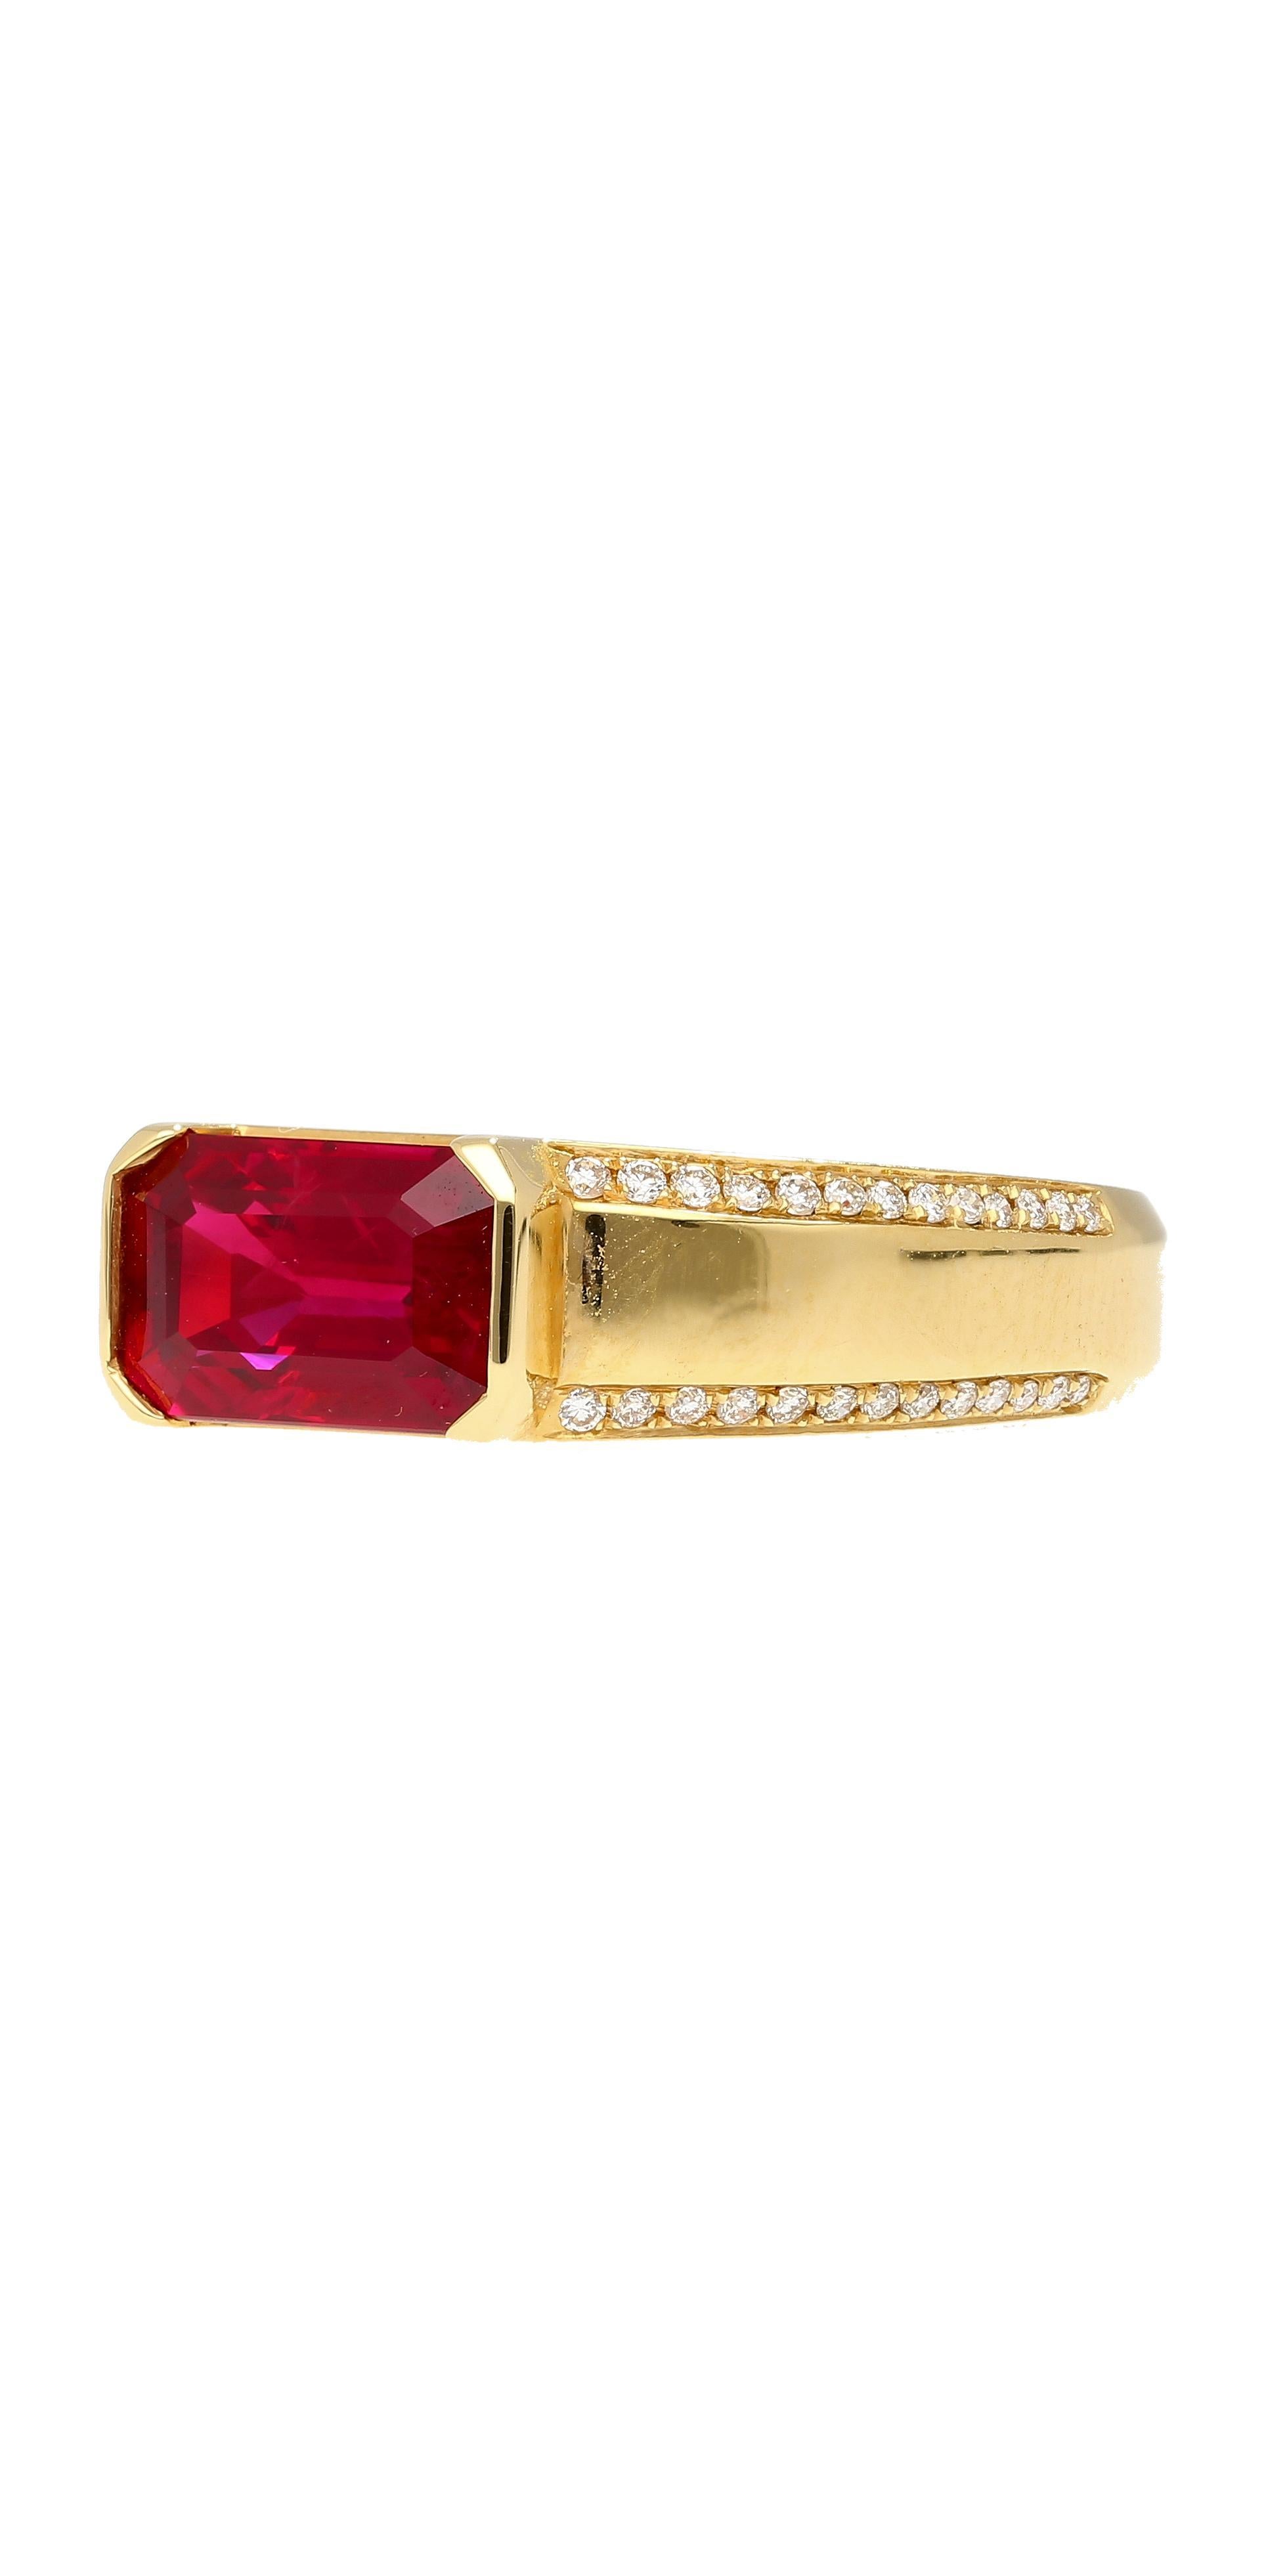 Modern 2.09 Carat Vivid Red Pigeon's Blood Burma Ruby Emerald Cut East-West Ring For Sale